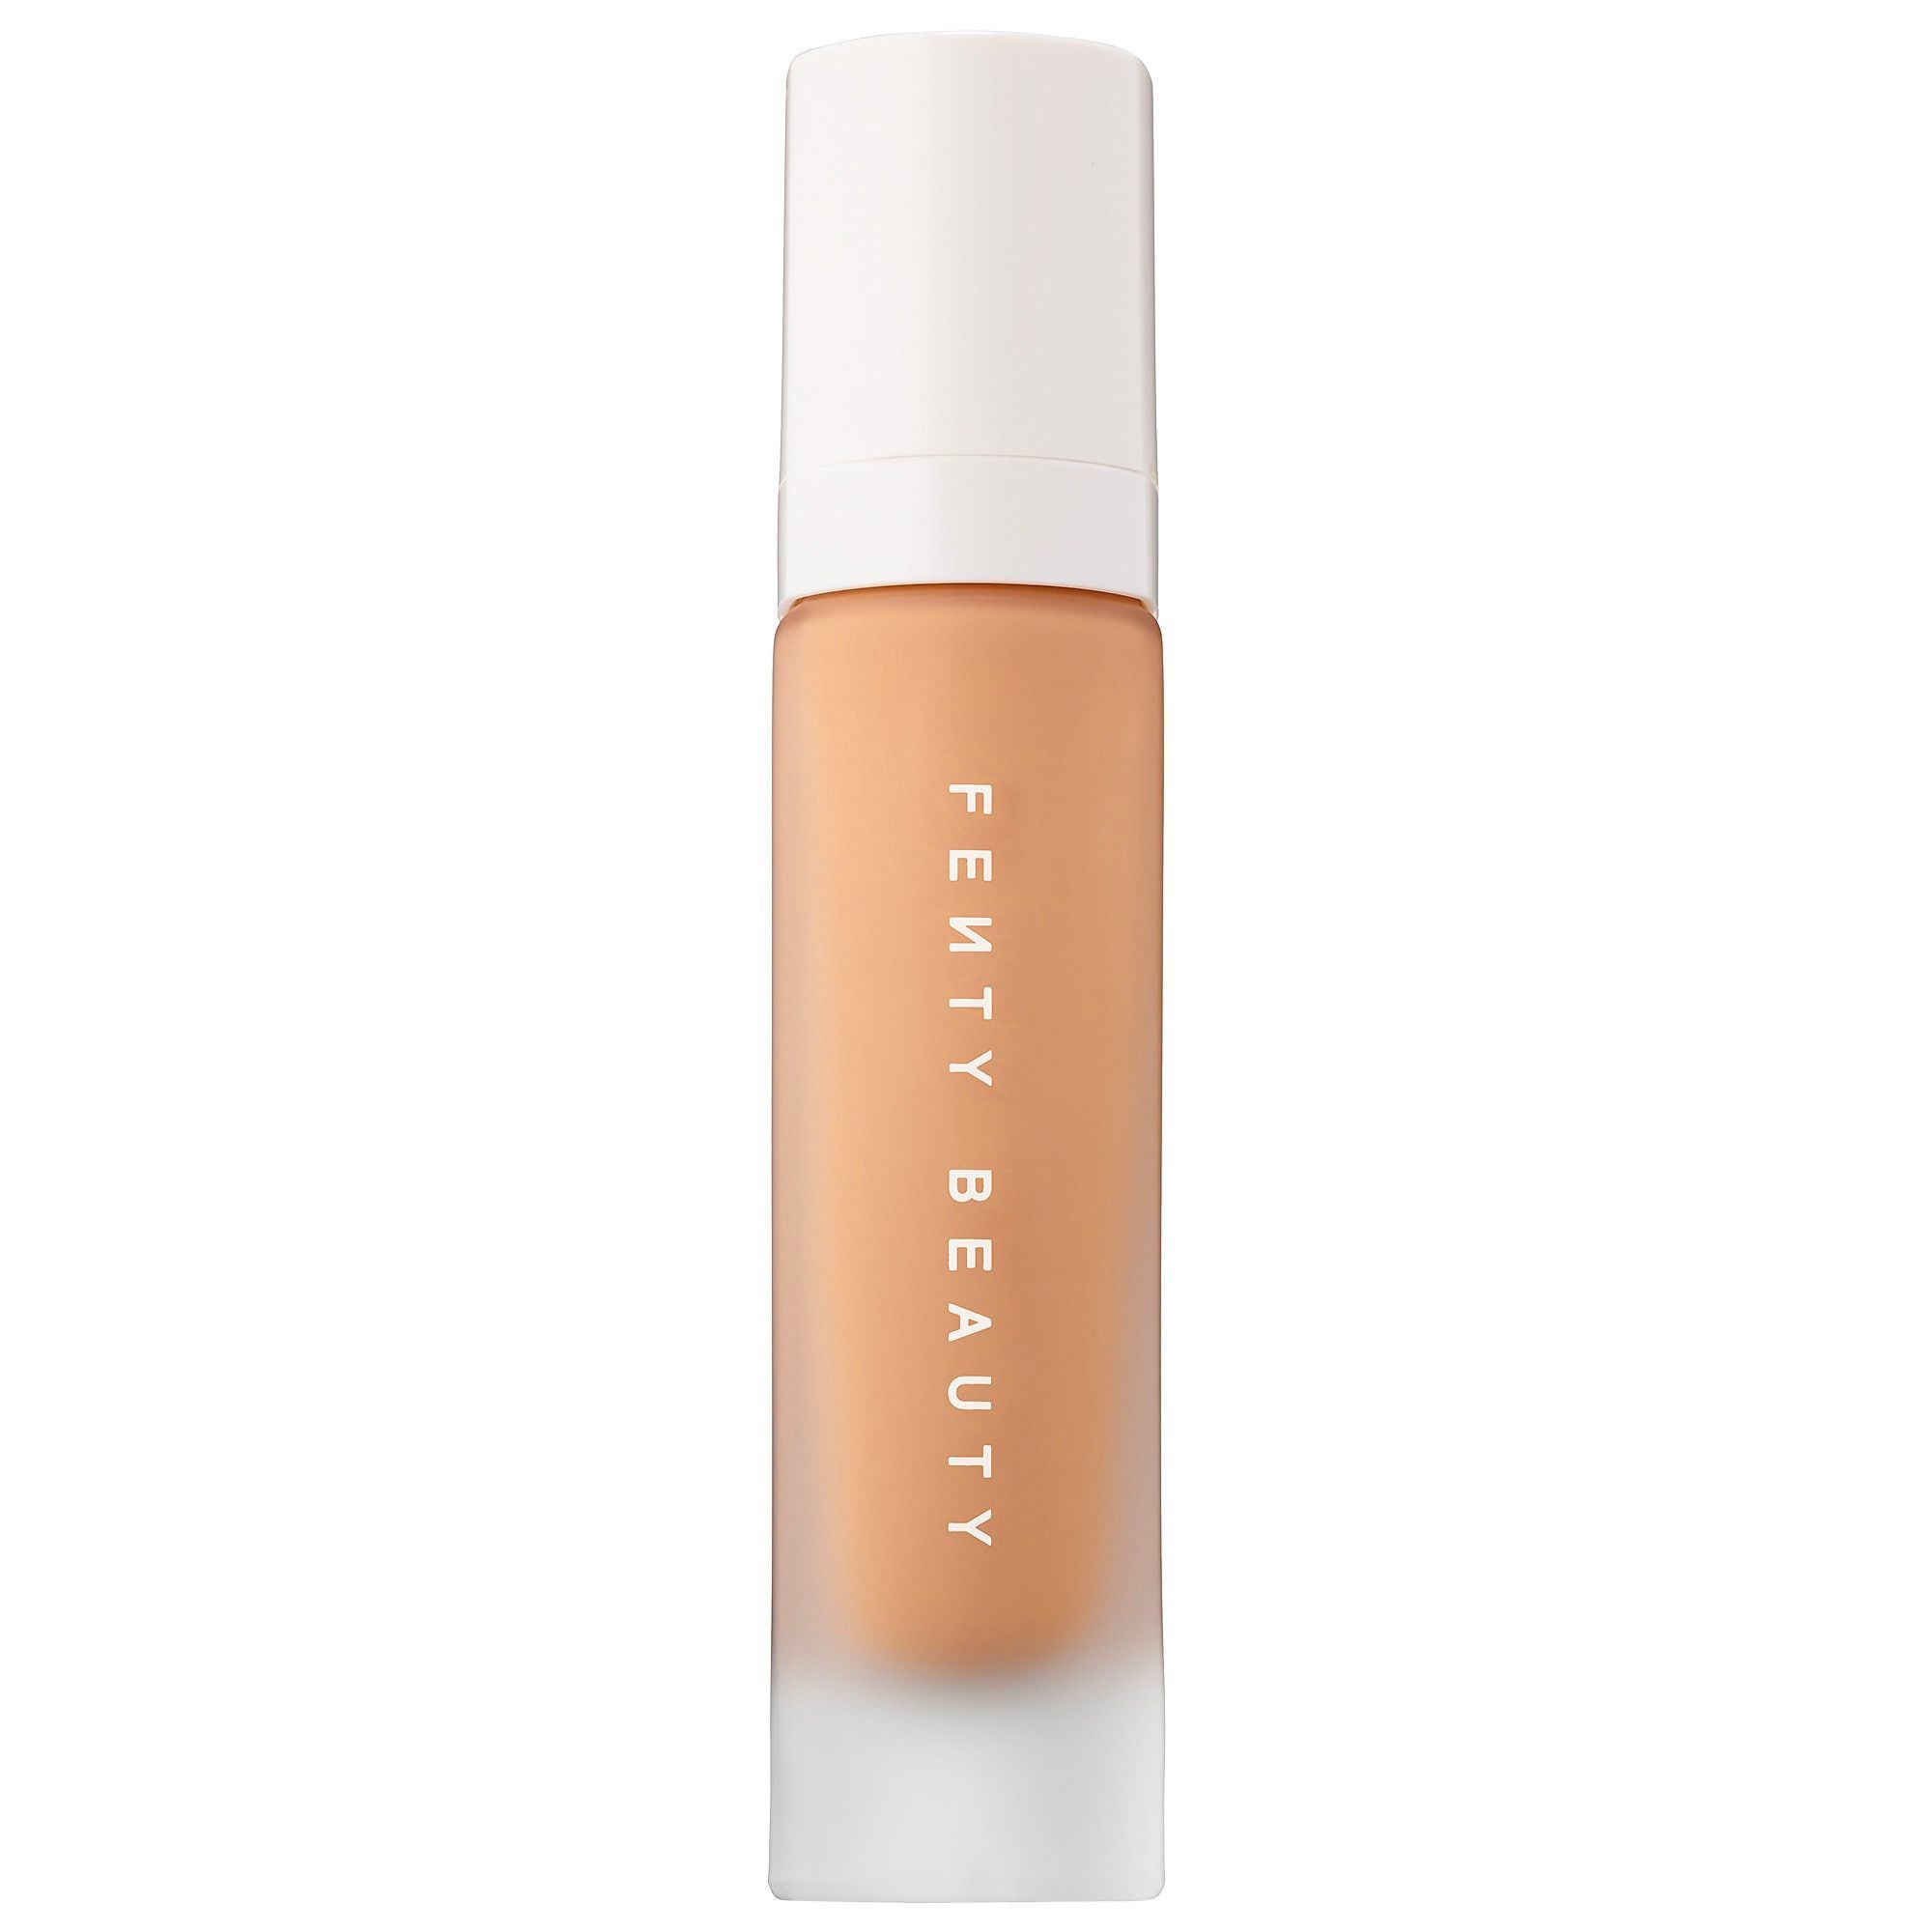 best foundation for oily skin and good coverage